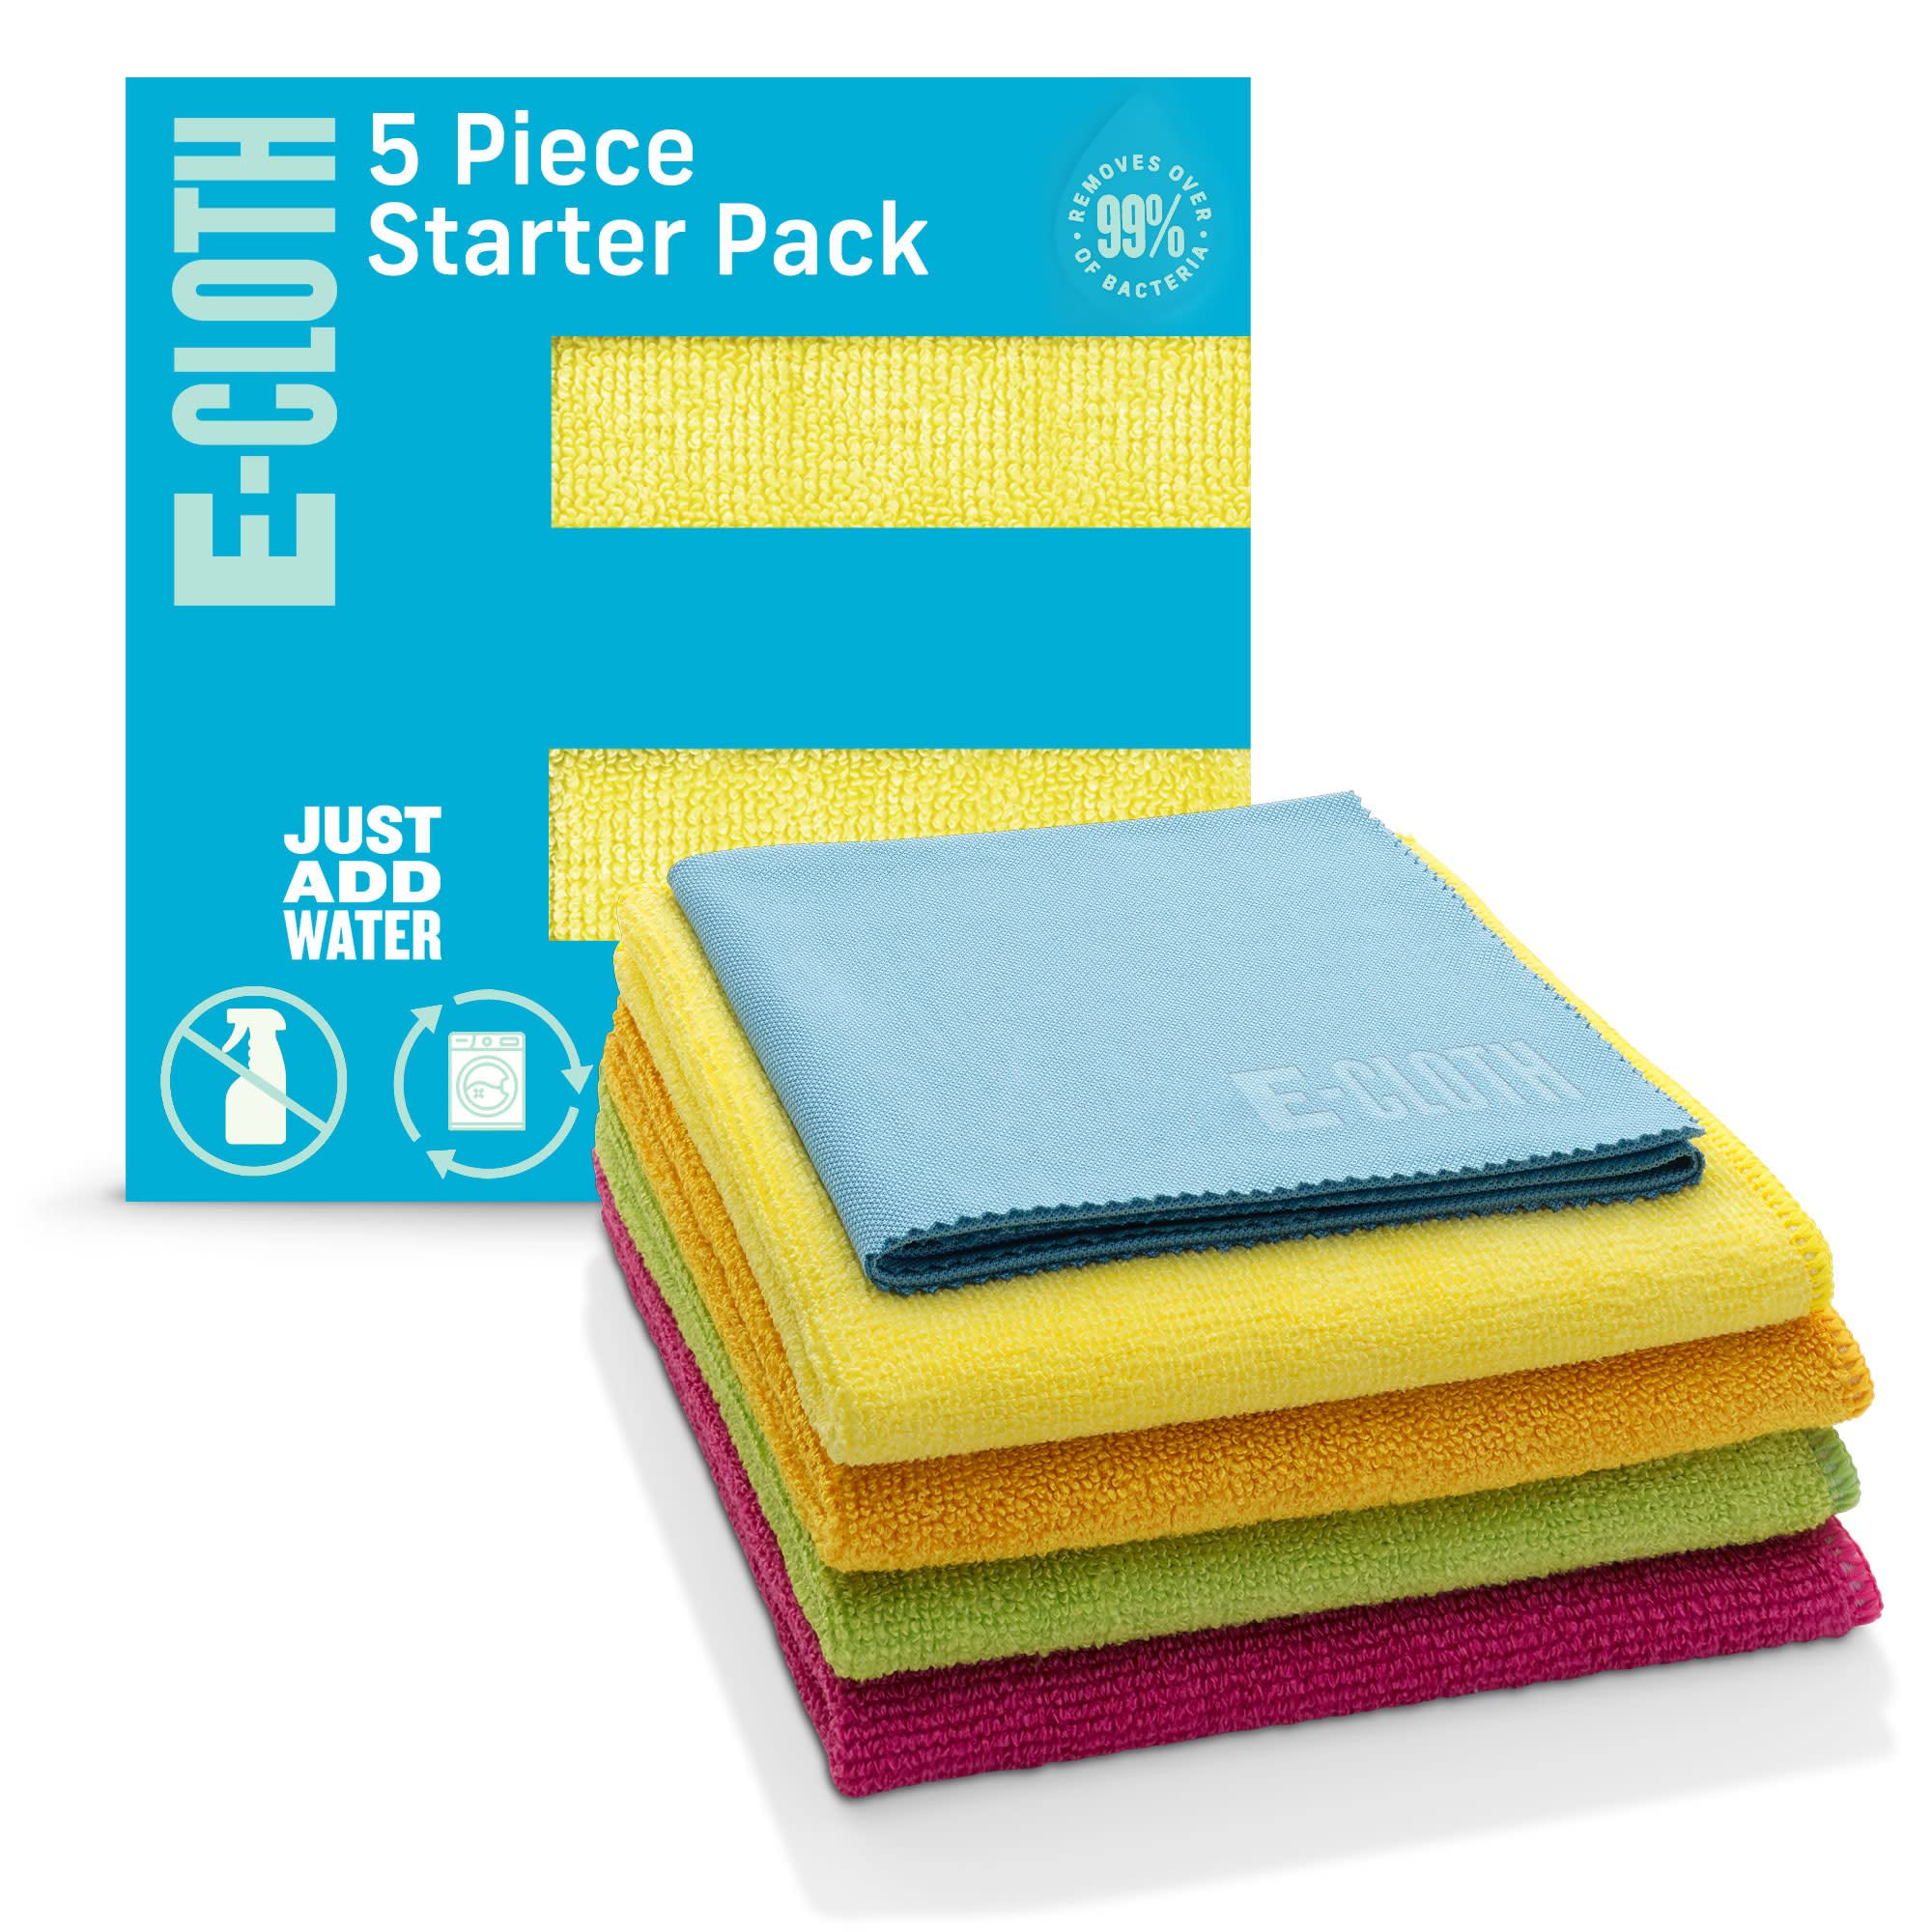 E-Cloth Starter Pack, Premium Microfiber Cleaning Cloths, Great Household Cleaning Tools for Bathroom, Kitchen, and Cars, Washable and Reusable, 300 Wash Guarante, Assorted Colors, 5 Piece Set